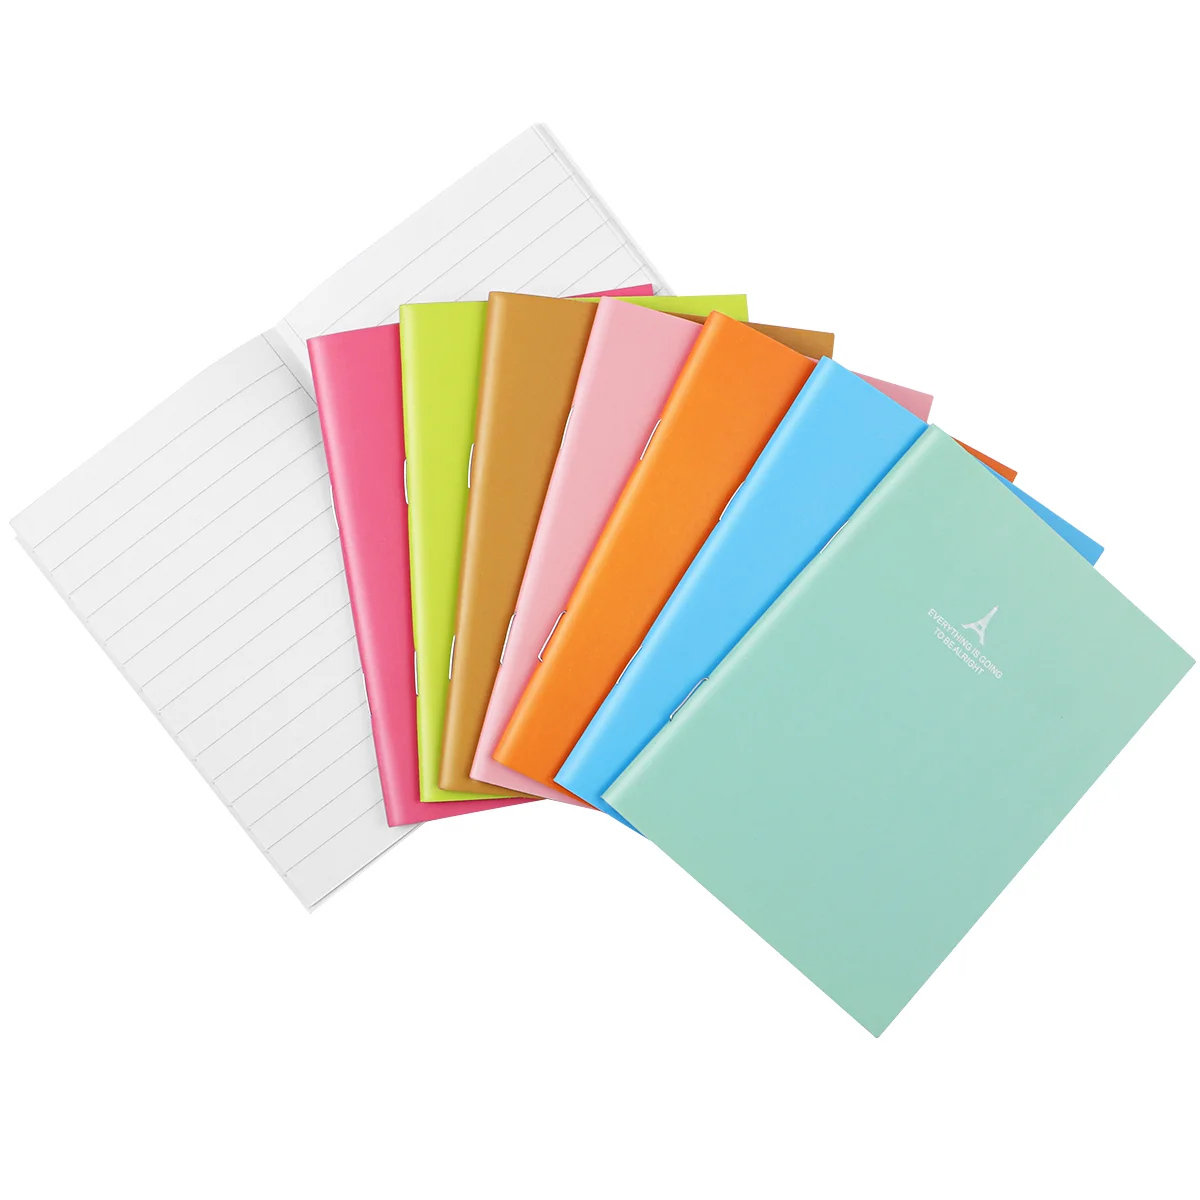 

24pcs Notebook Candy Colors Portable Memo Notebook, Pocket Journals Blank Notepads for Students Supplies ( 8 Colors ）